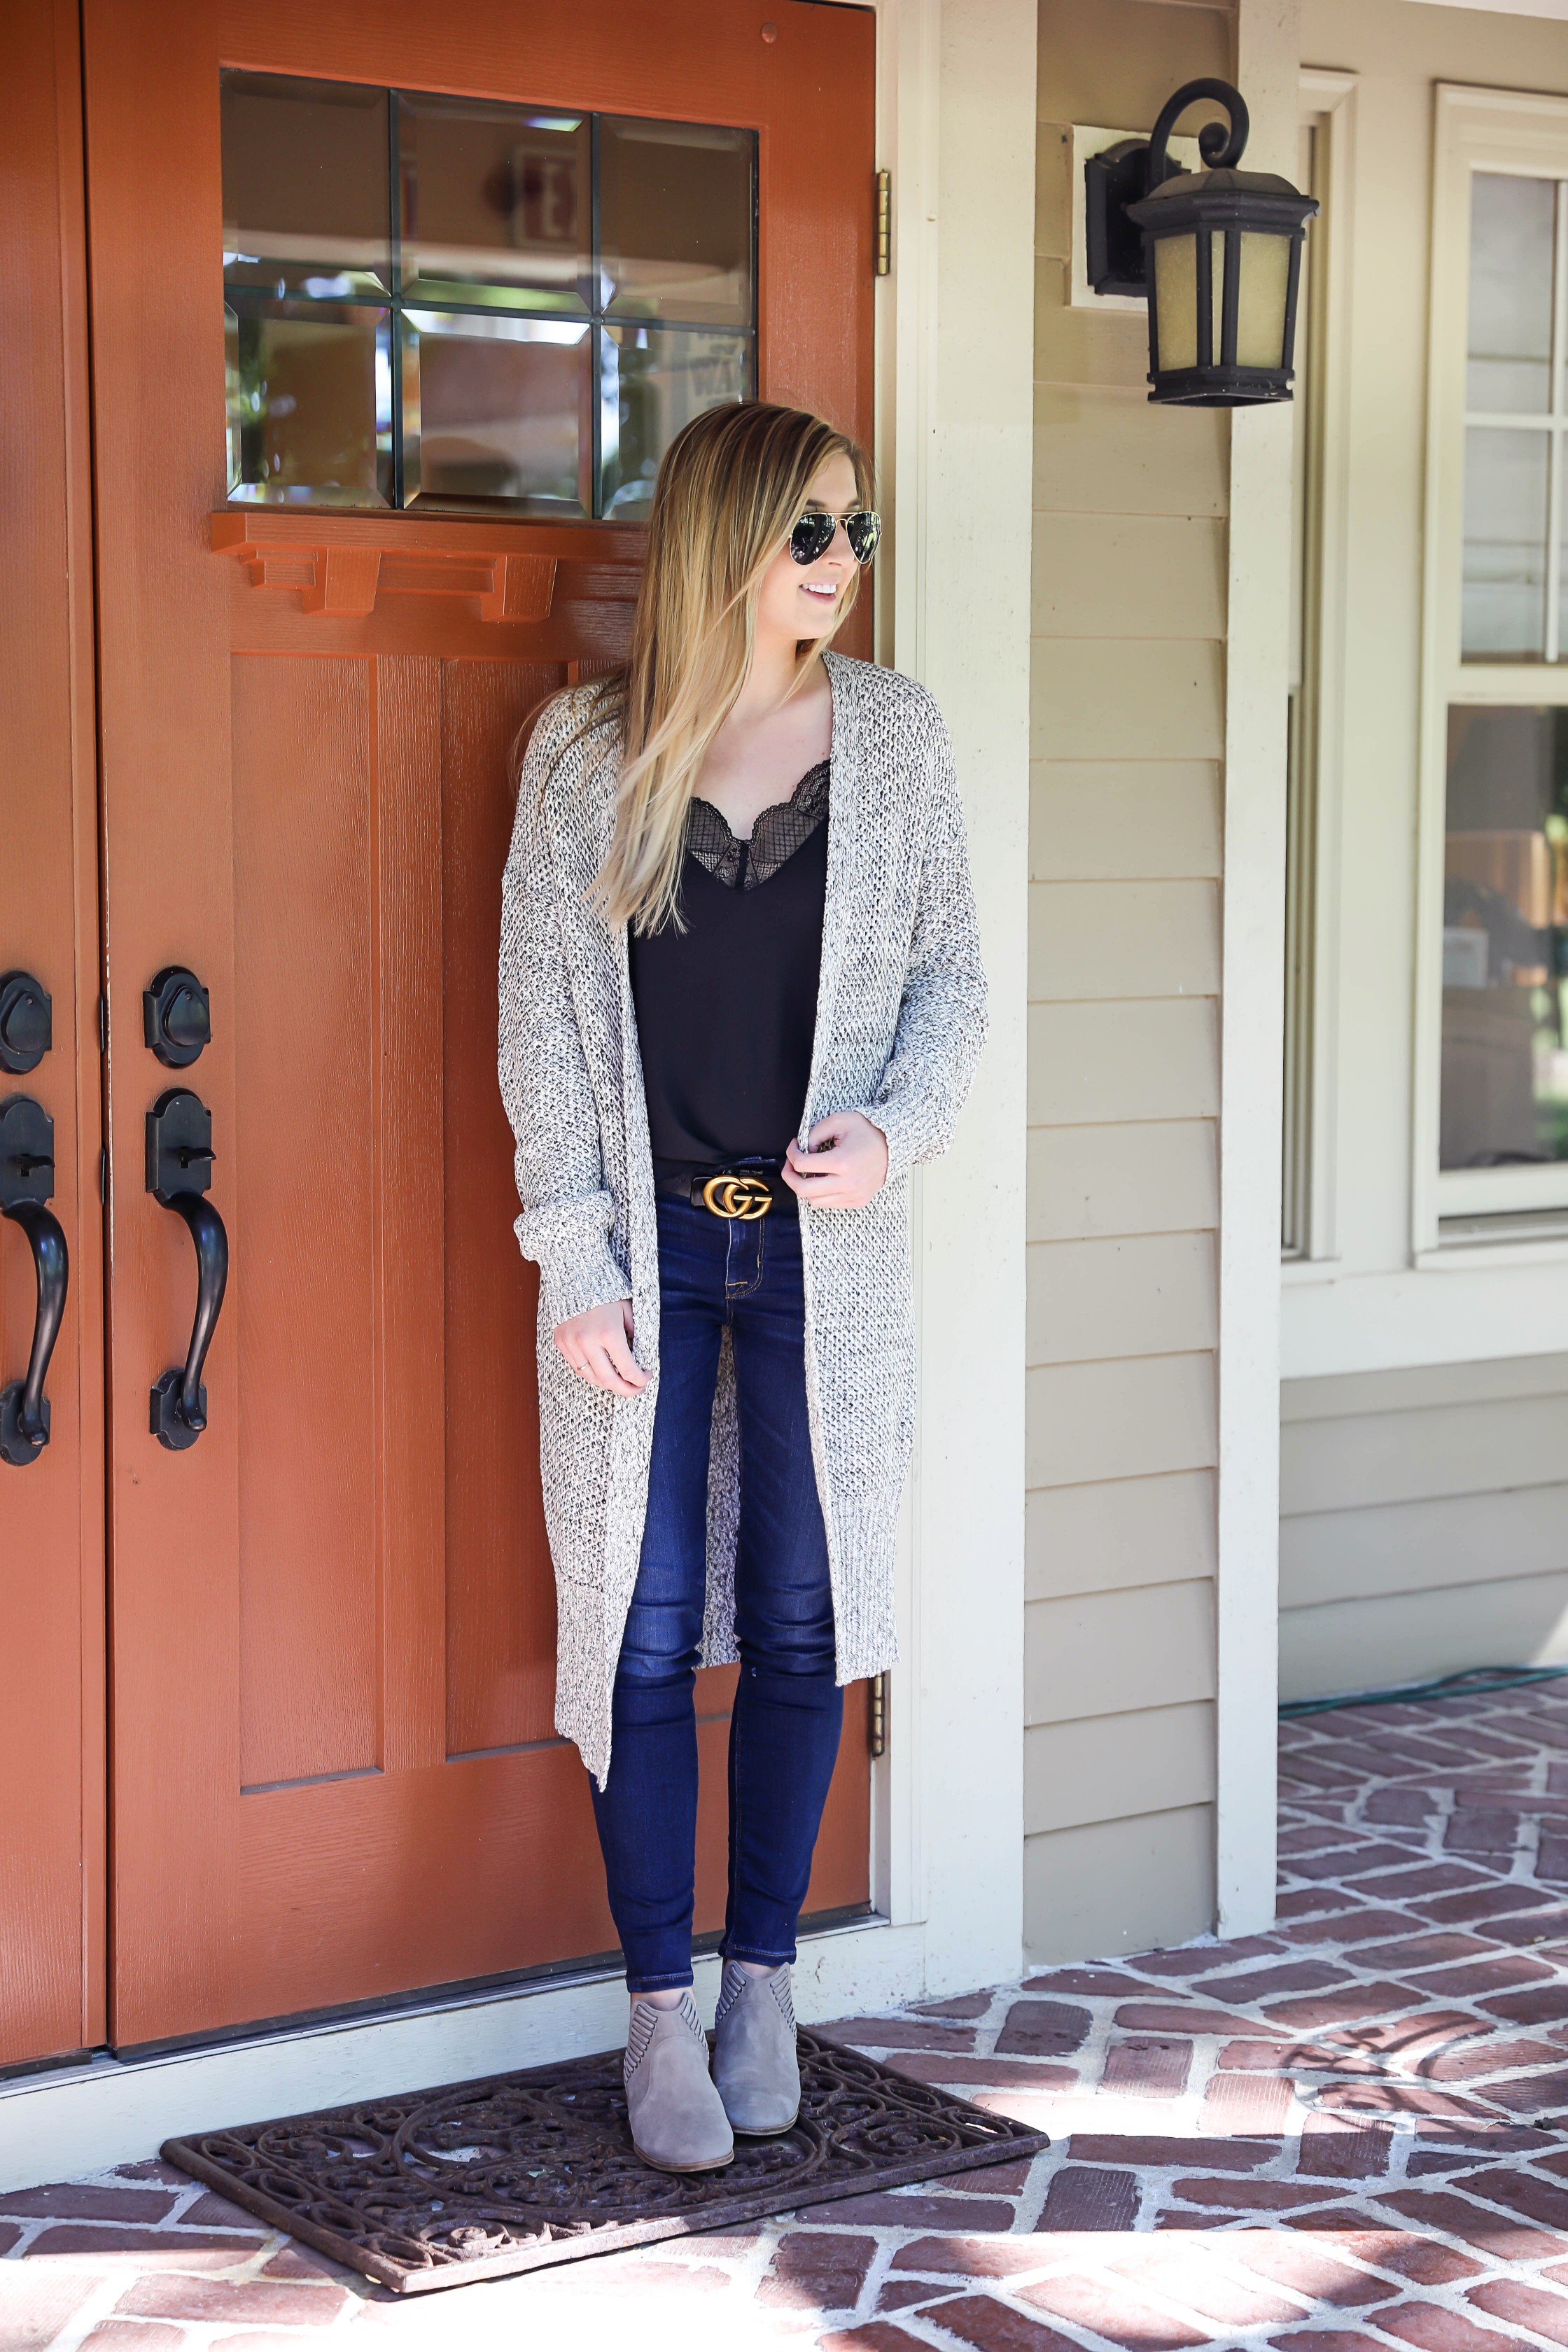 Black cami with long grery knitted duster! Perfect fall outfit paired with a cute gucci belt and dark denim jeans! I am also wearing my vince camuto booties that I love for autumn! Details on fashion blog daily dose of charm by lauren lindmark